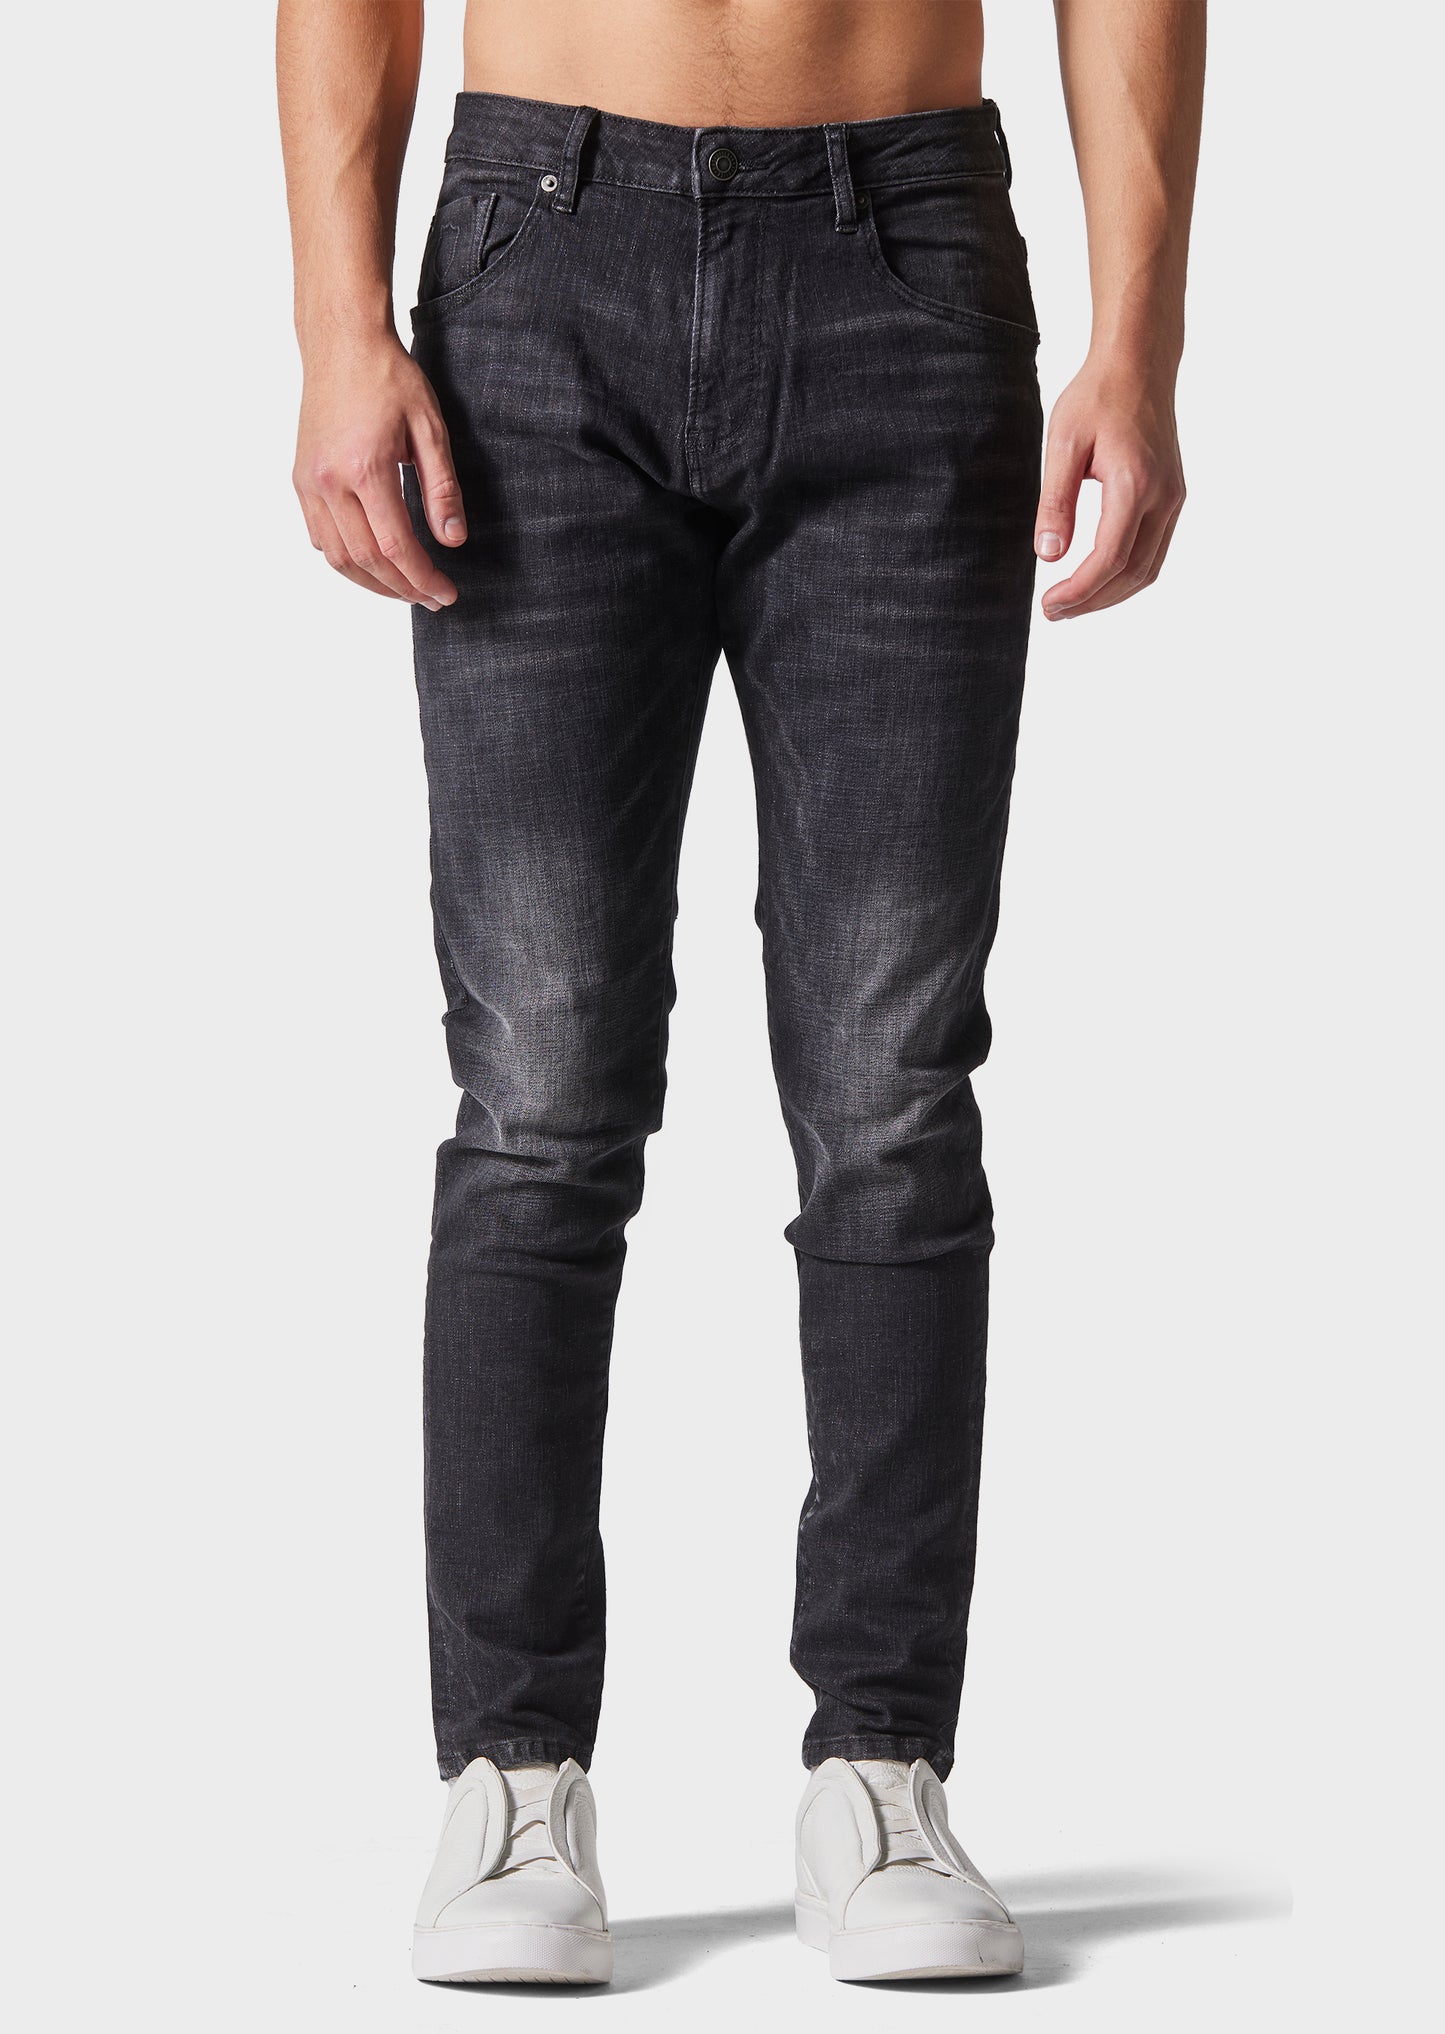 Moriarty COR 956W Black Slim Fit Jeans